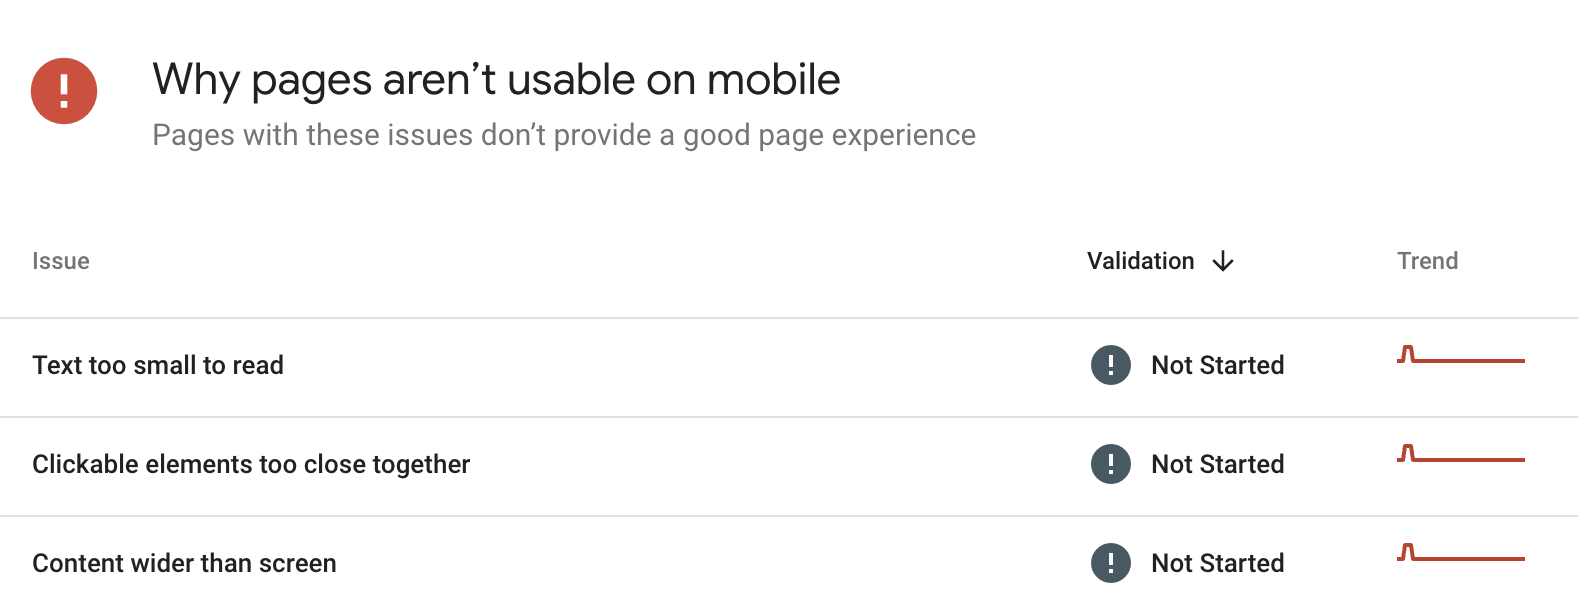 Mobile usability issues on Google Search Console